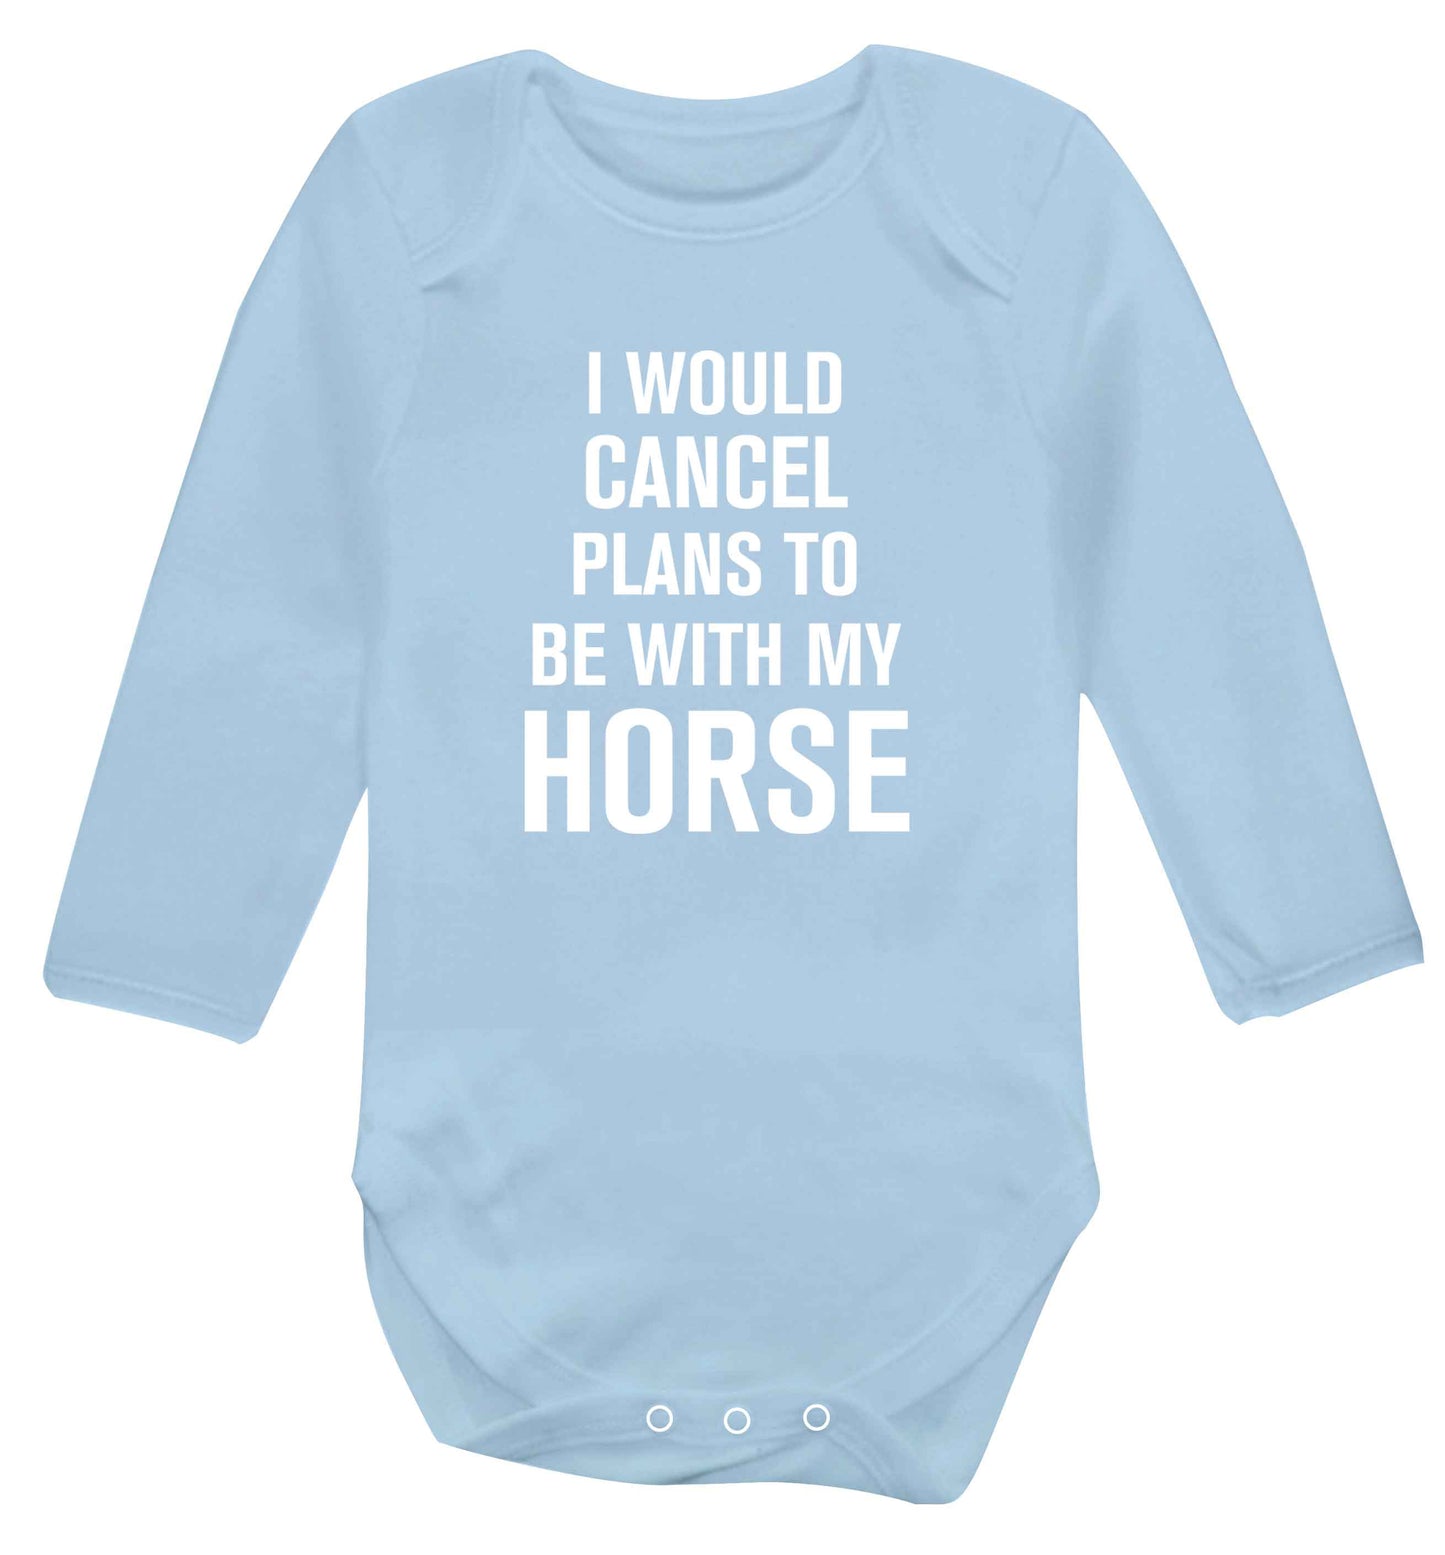 I will cancel plans to be with my horse baby vest long sleeved pale blue 6-12 months